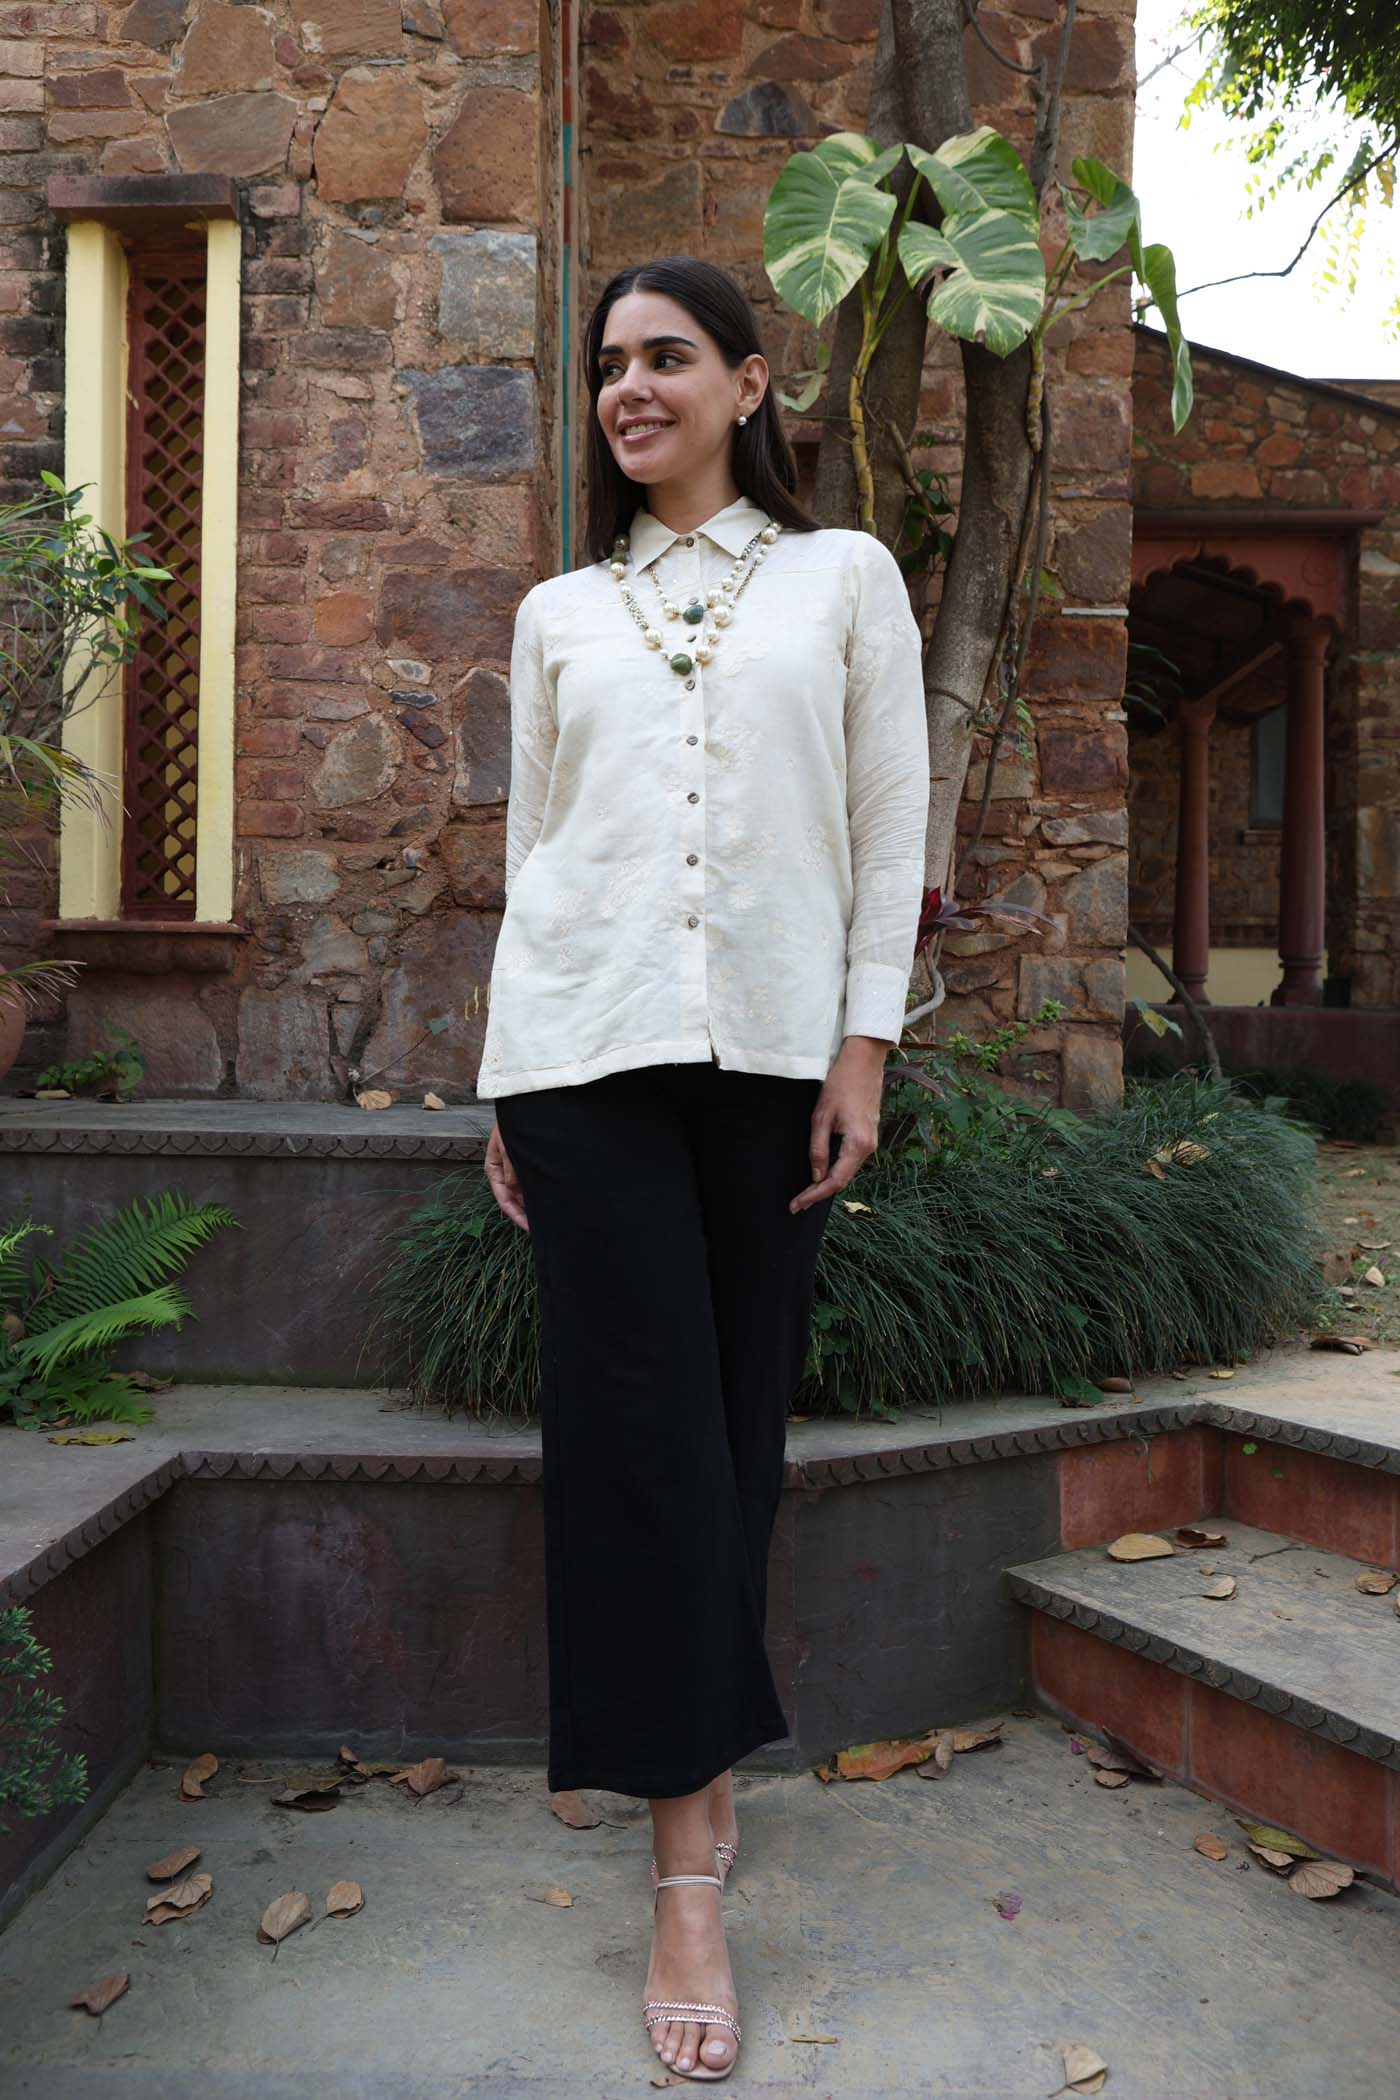 Ivory Embroidered Handloom Pure Linen-Cotton Collared Short-Blouse With Striped Shoulder-Yoke And Cuffs